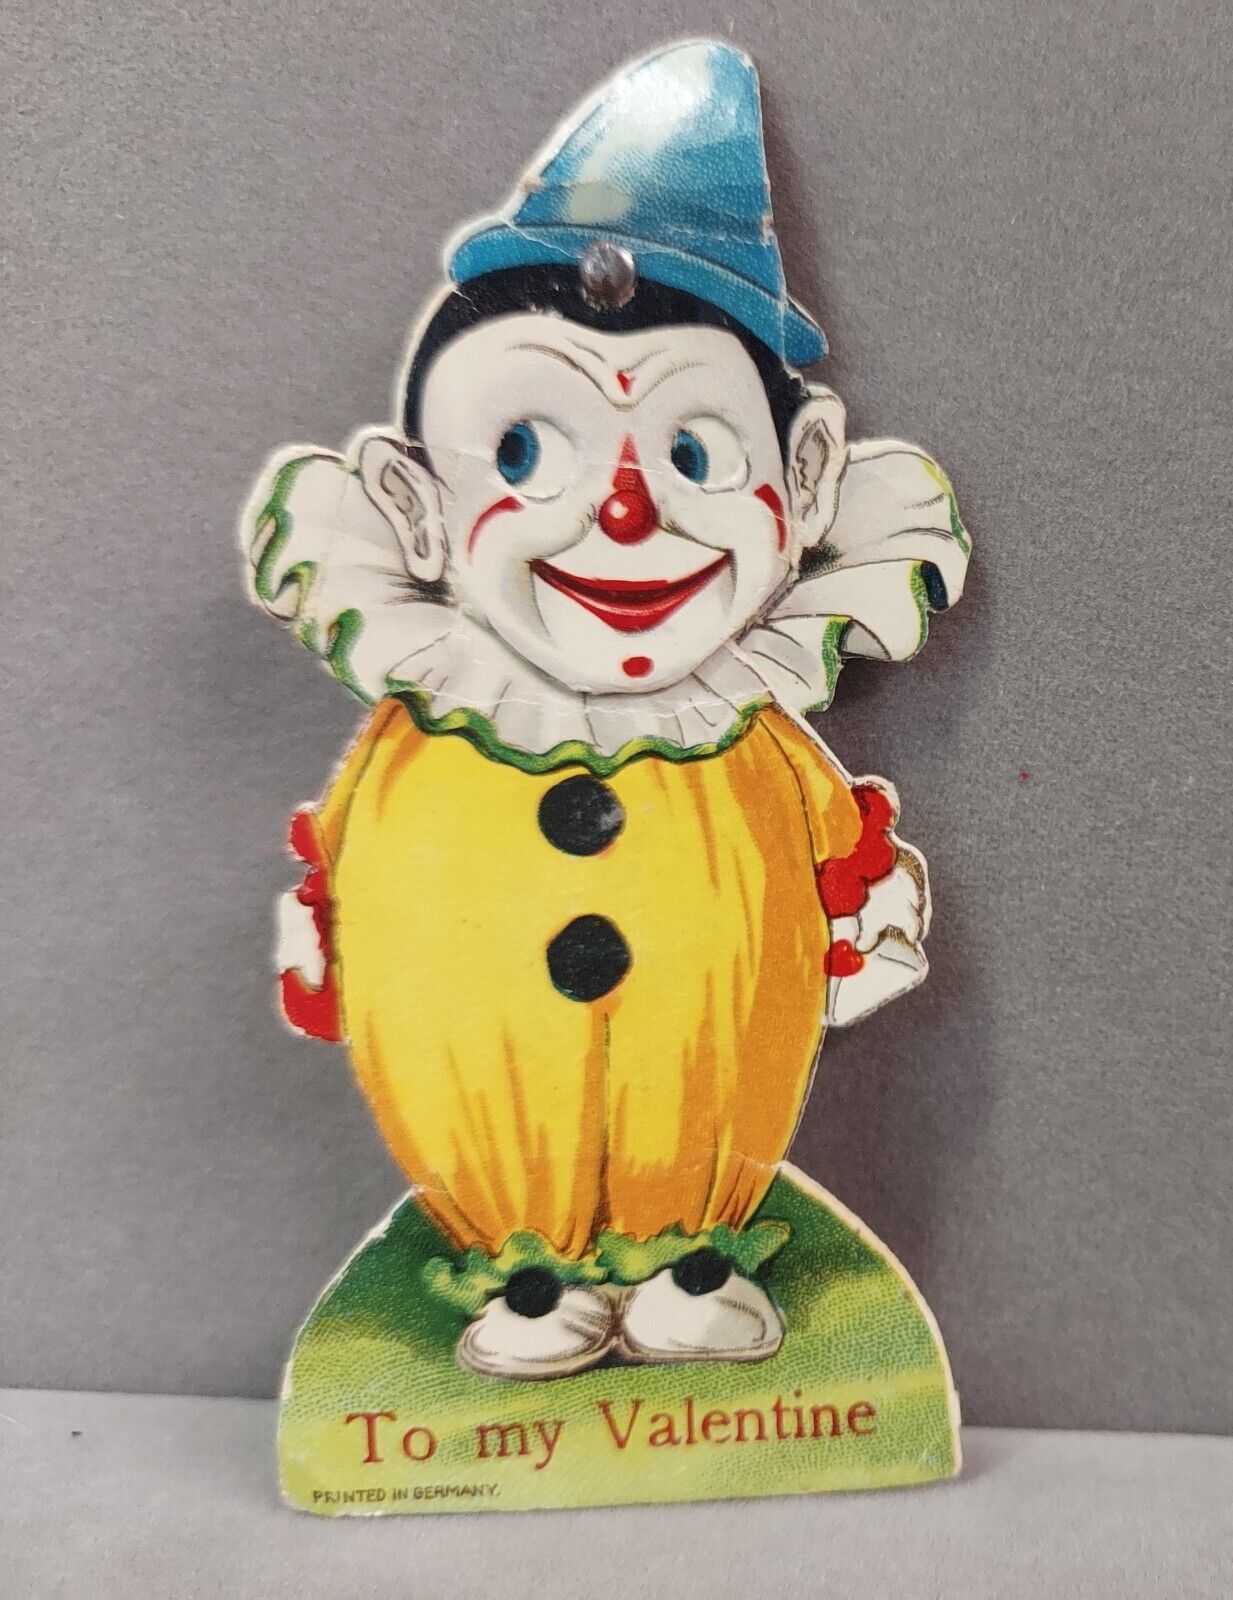 Vintage Die Cut Valentines Card 1940s Clown With Movable Head Shifting Eyes Used